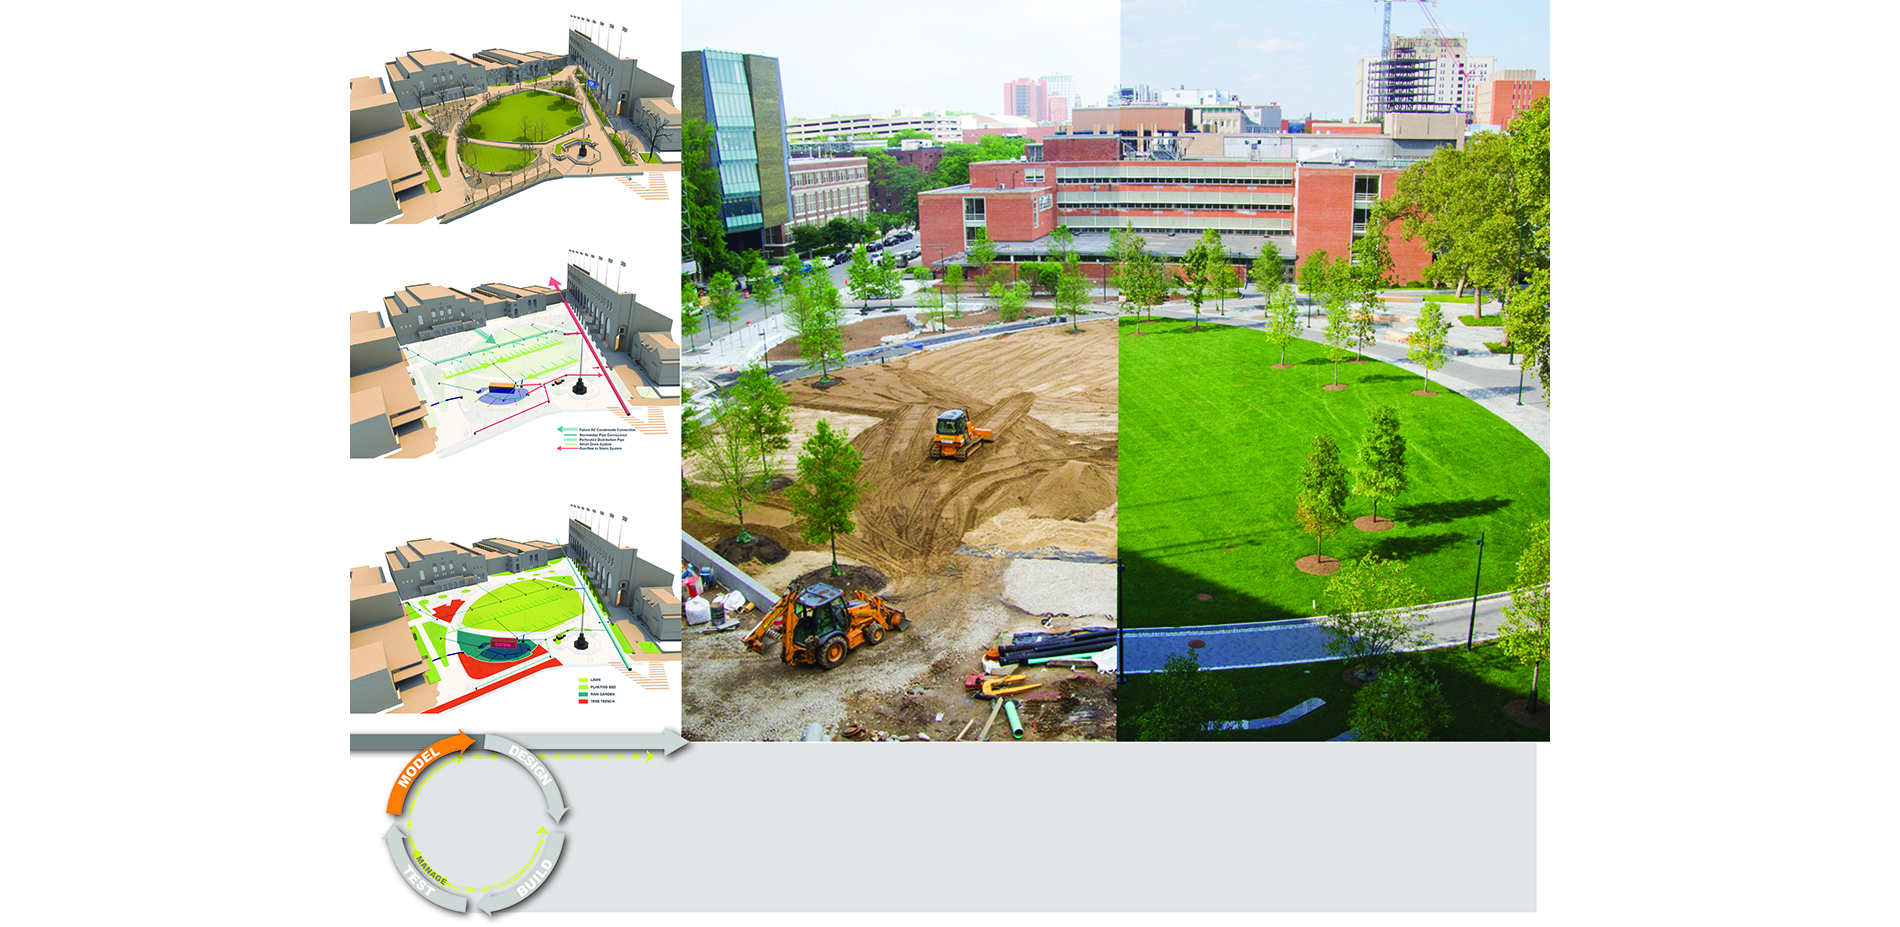 Green Stormwater Infrastructure Diagram and Photos